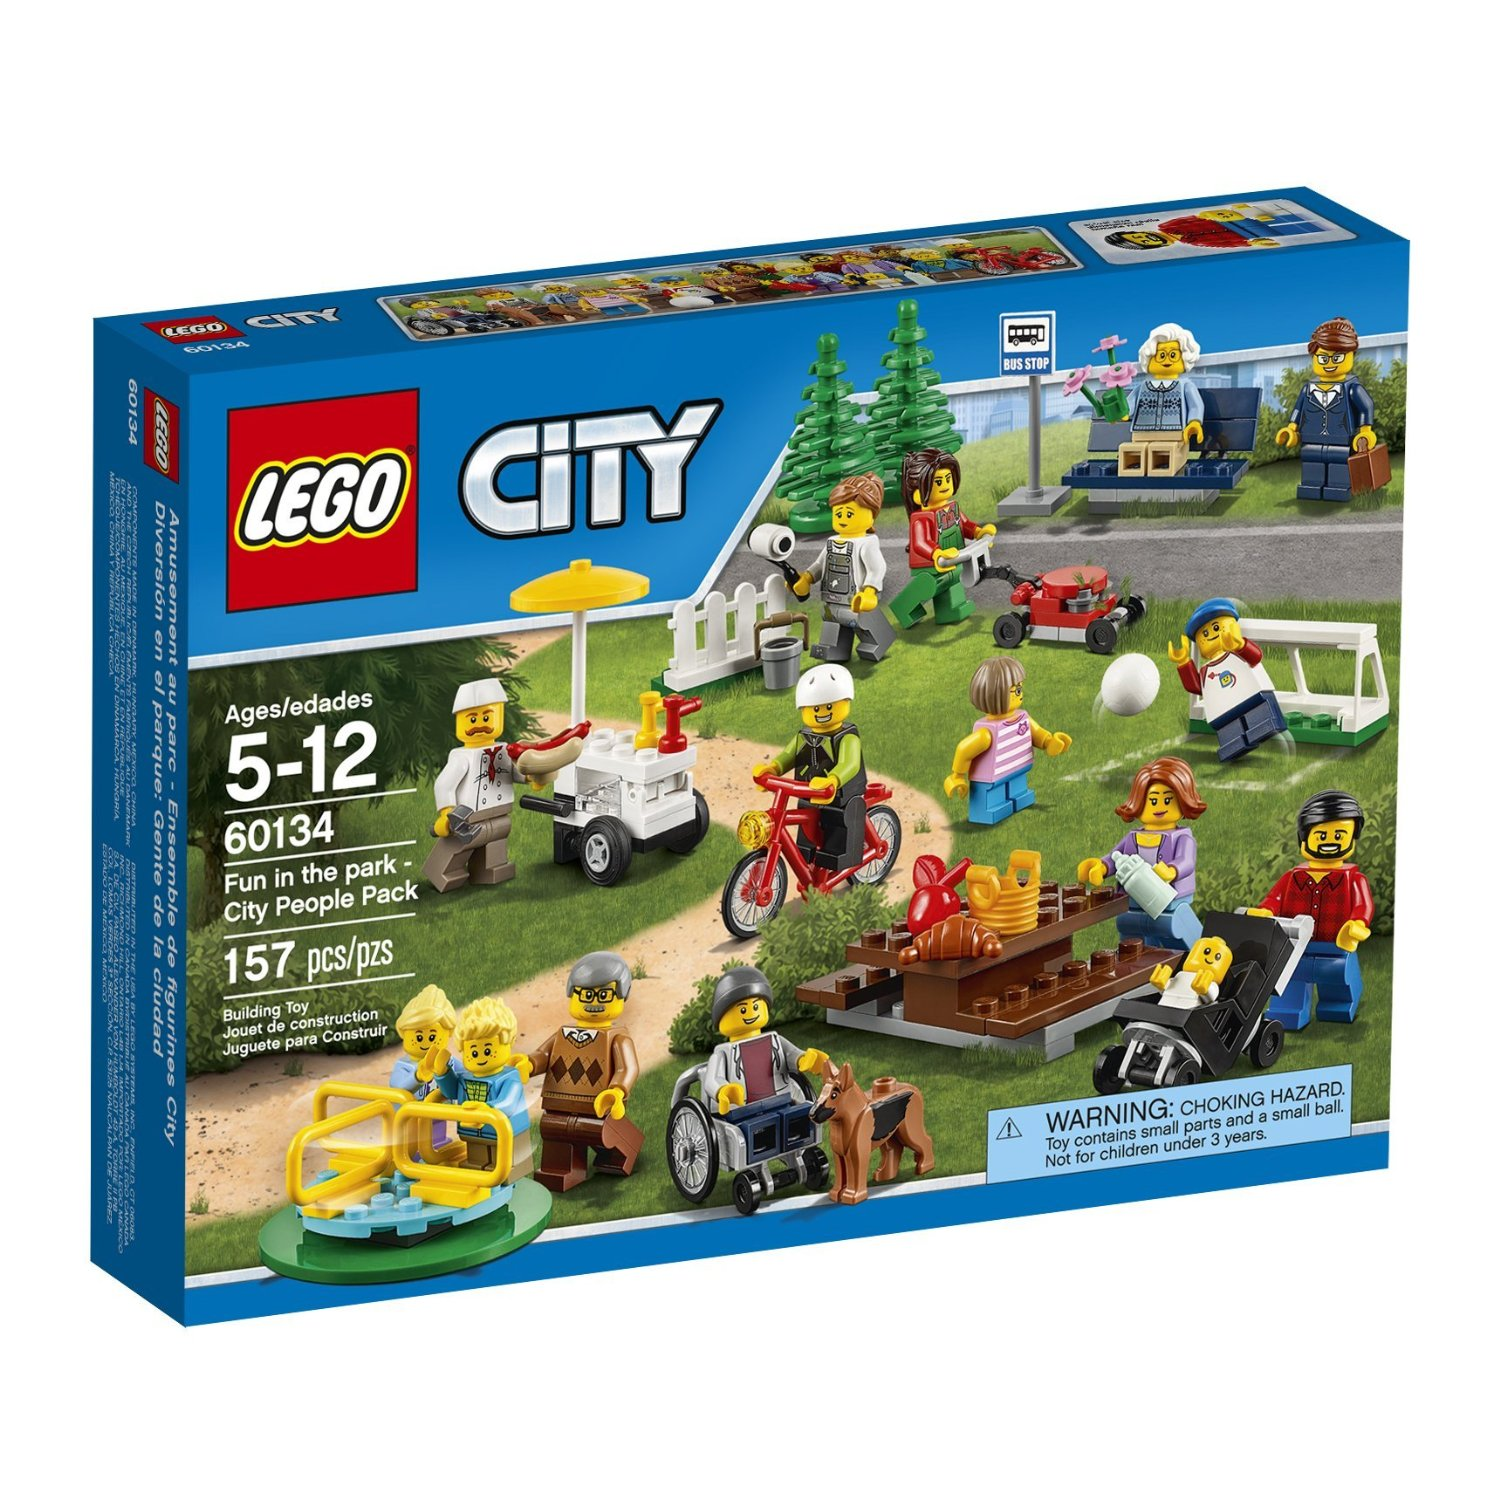 LEGO City Town Building Kit Only $29.94! (Reg $39.99)